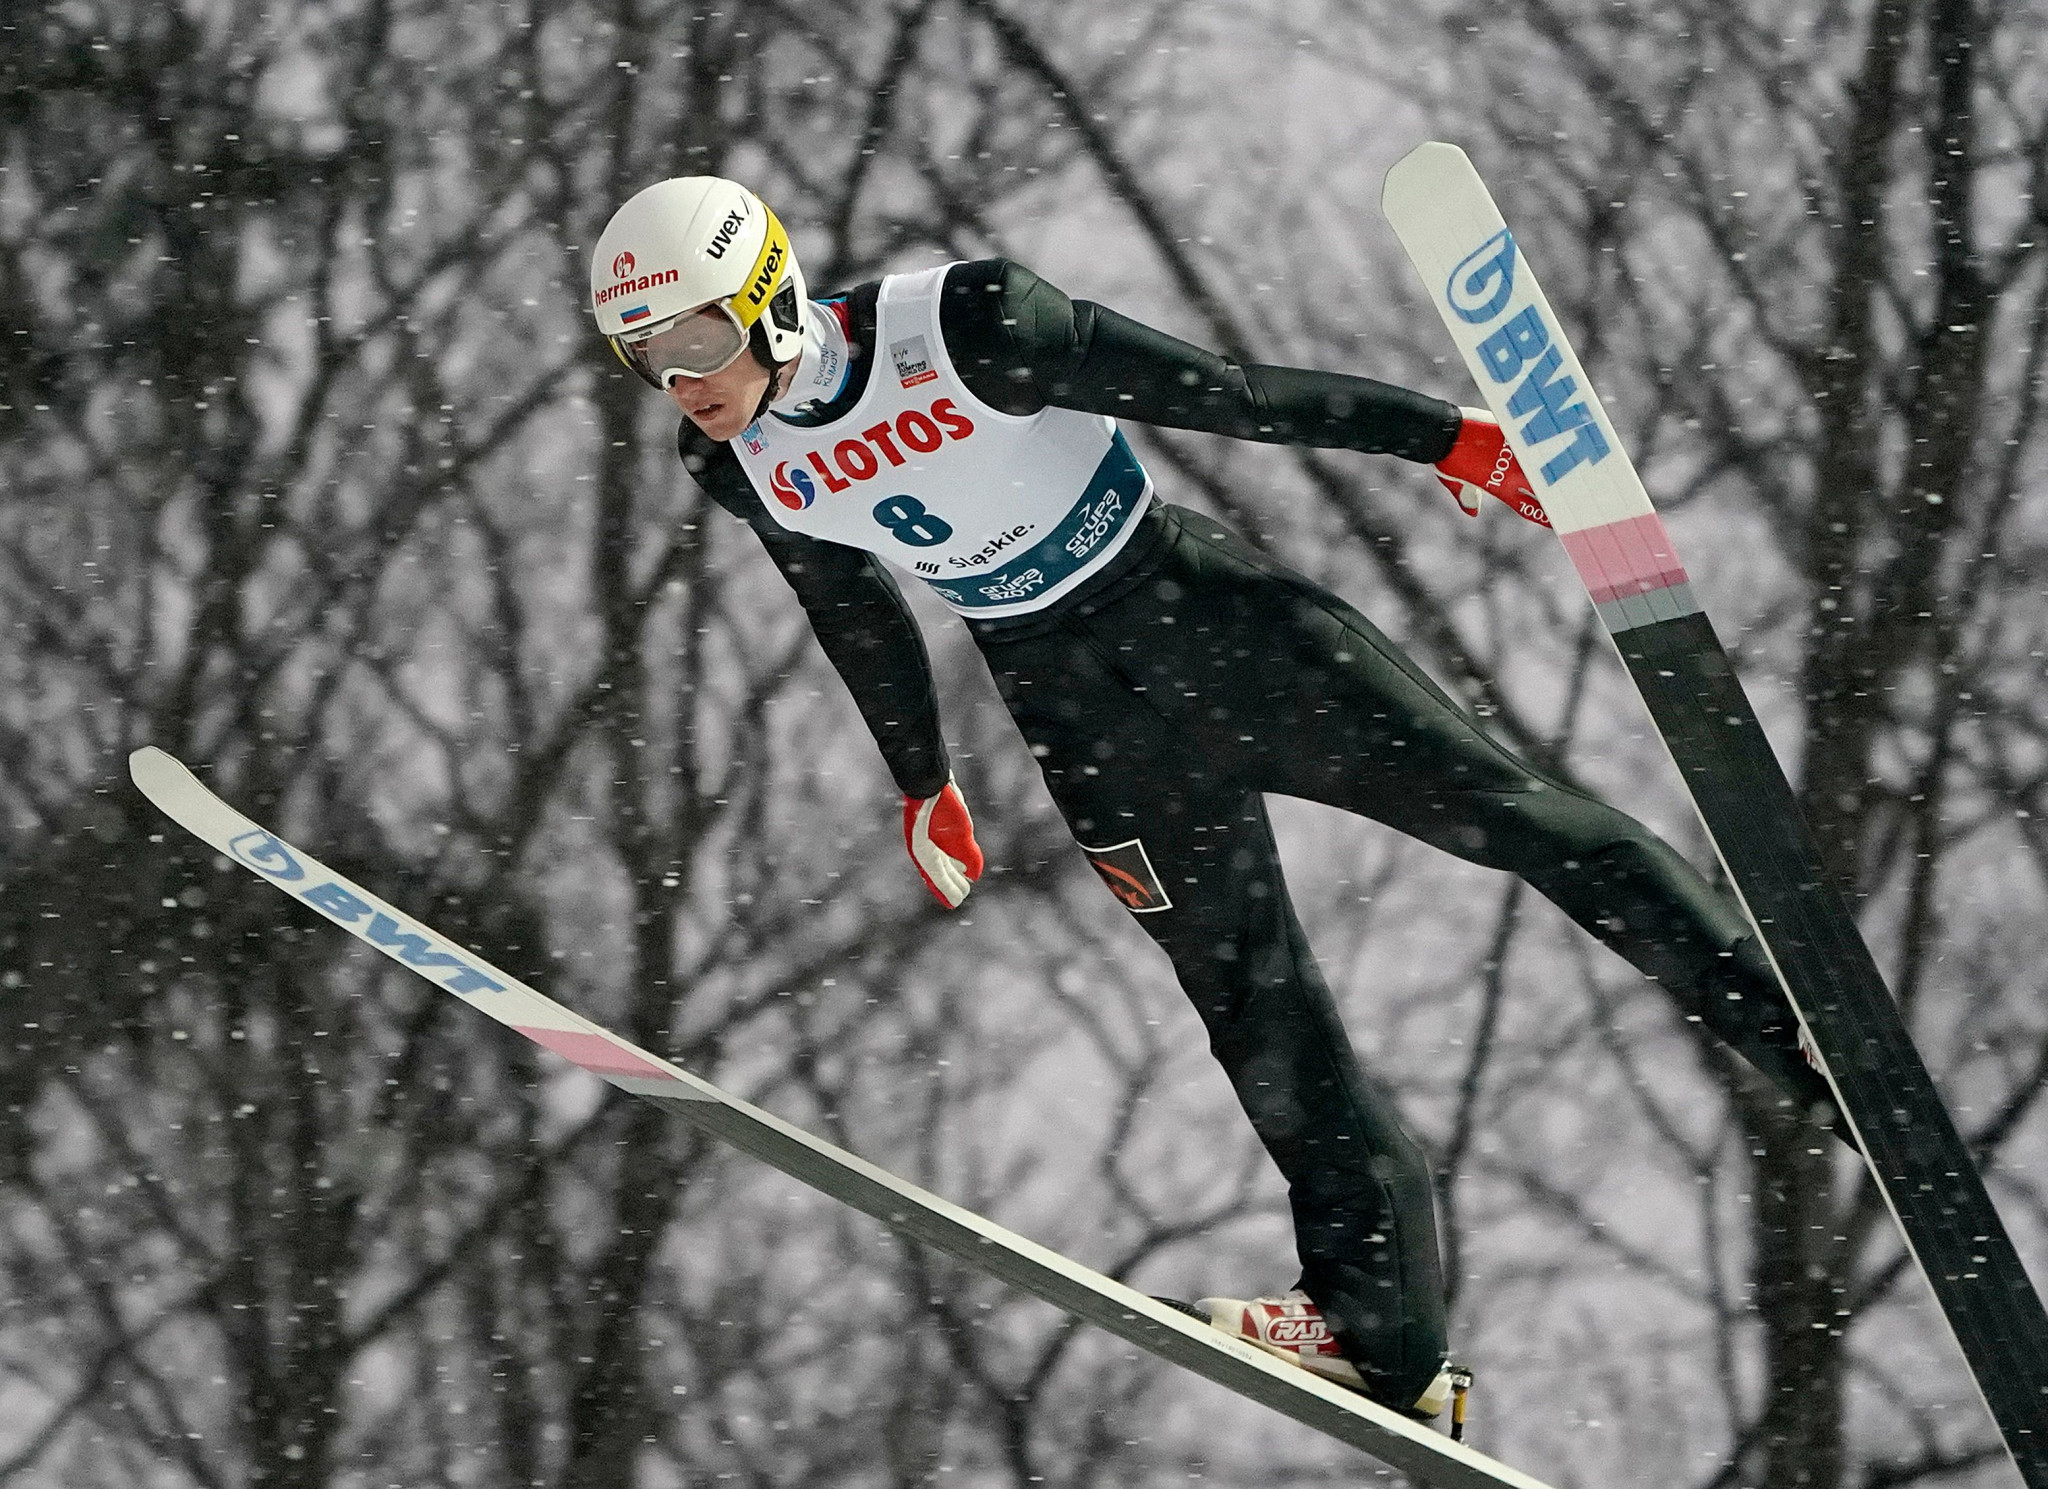 Kobayashi wins again to extend overall Ski Jumping World Cup lead